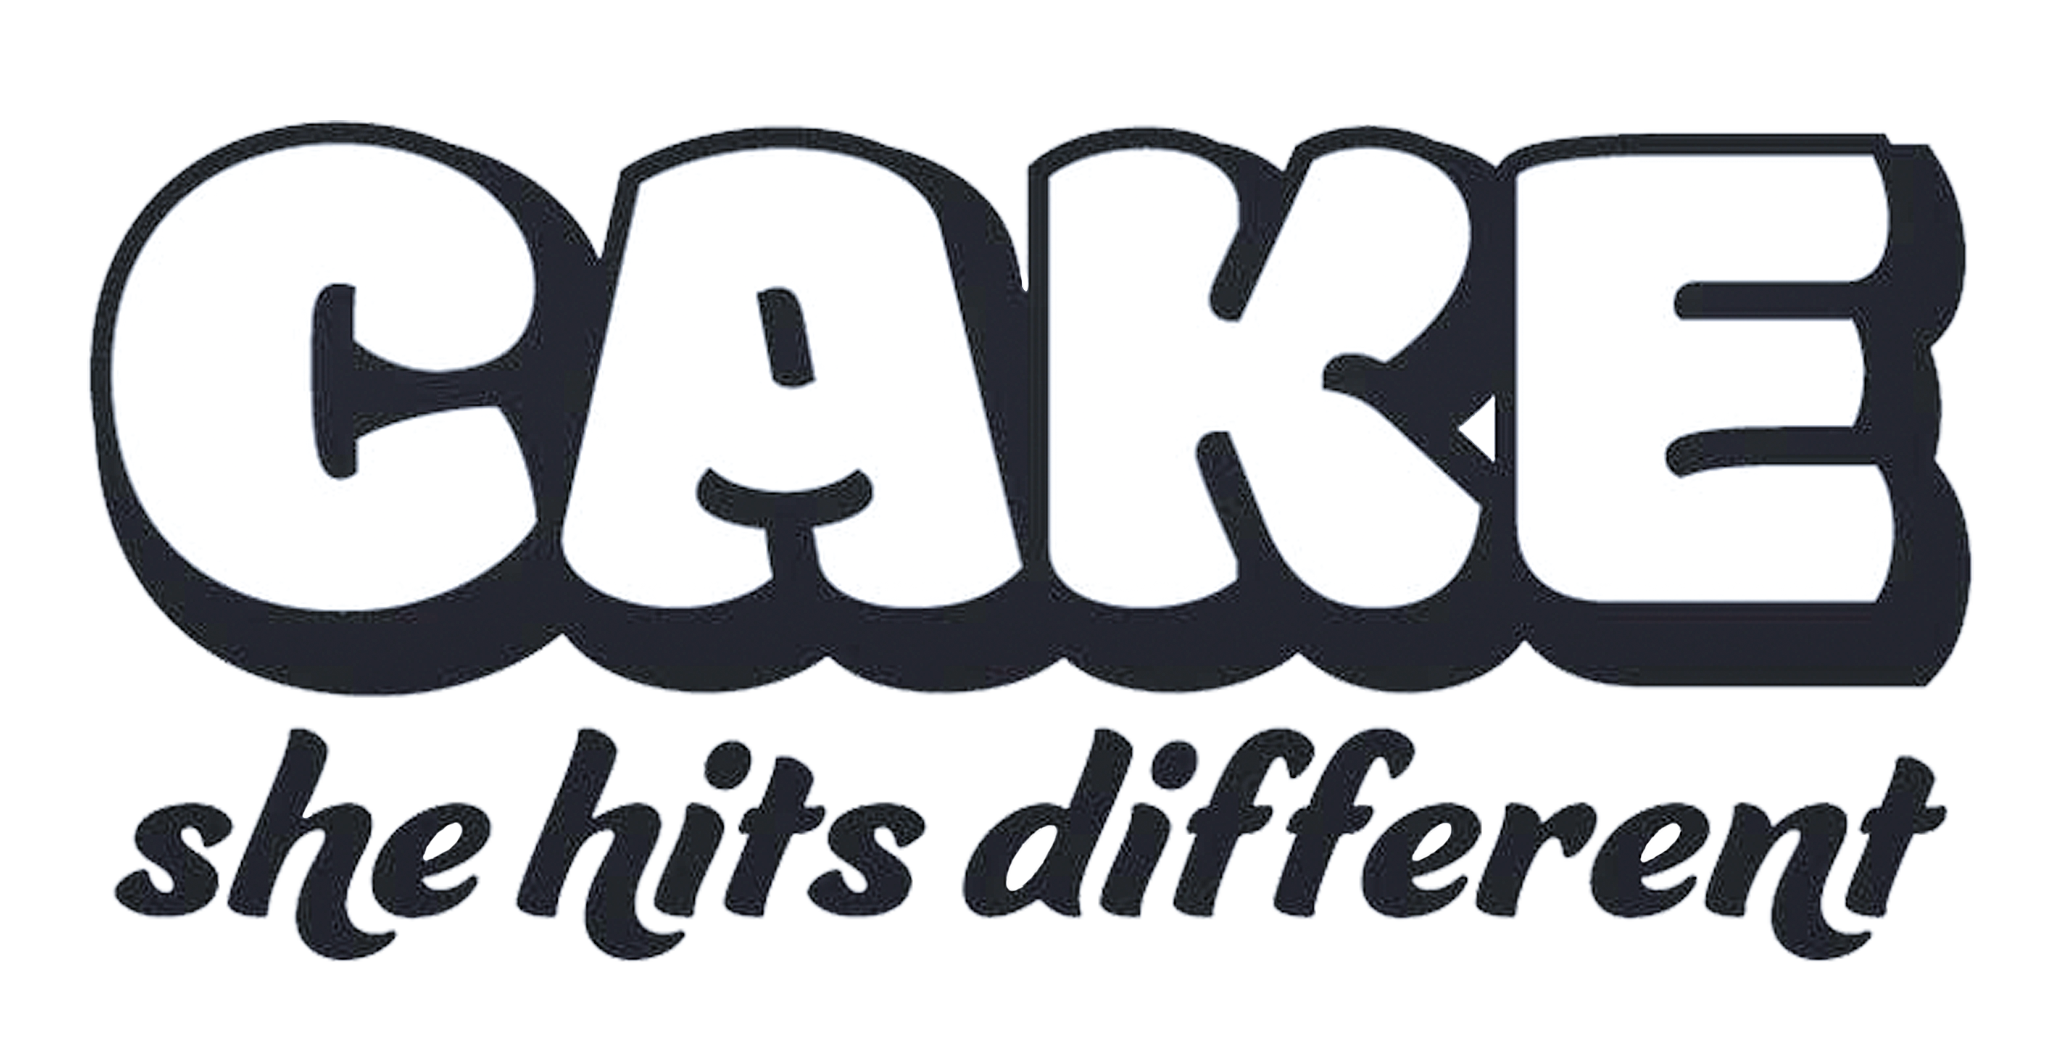 CAKECARTS.CO